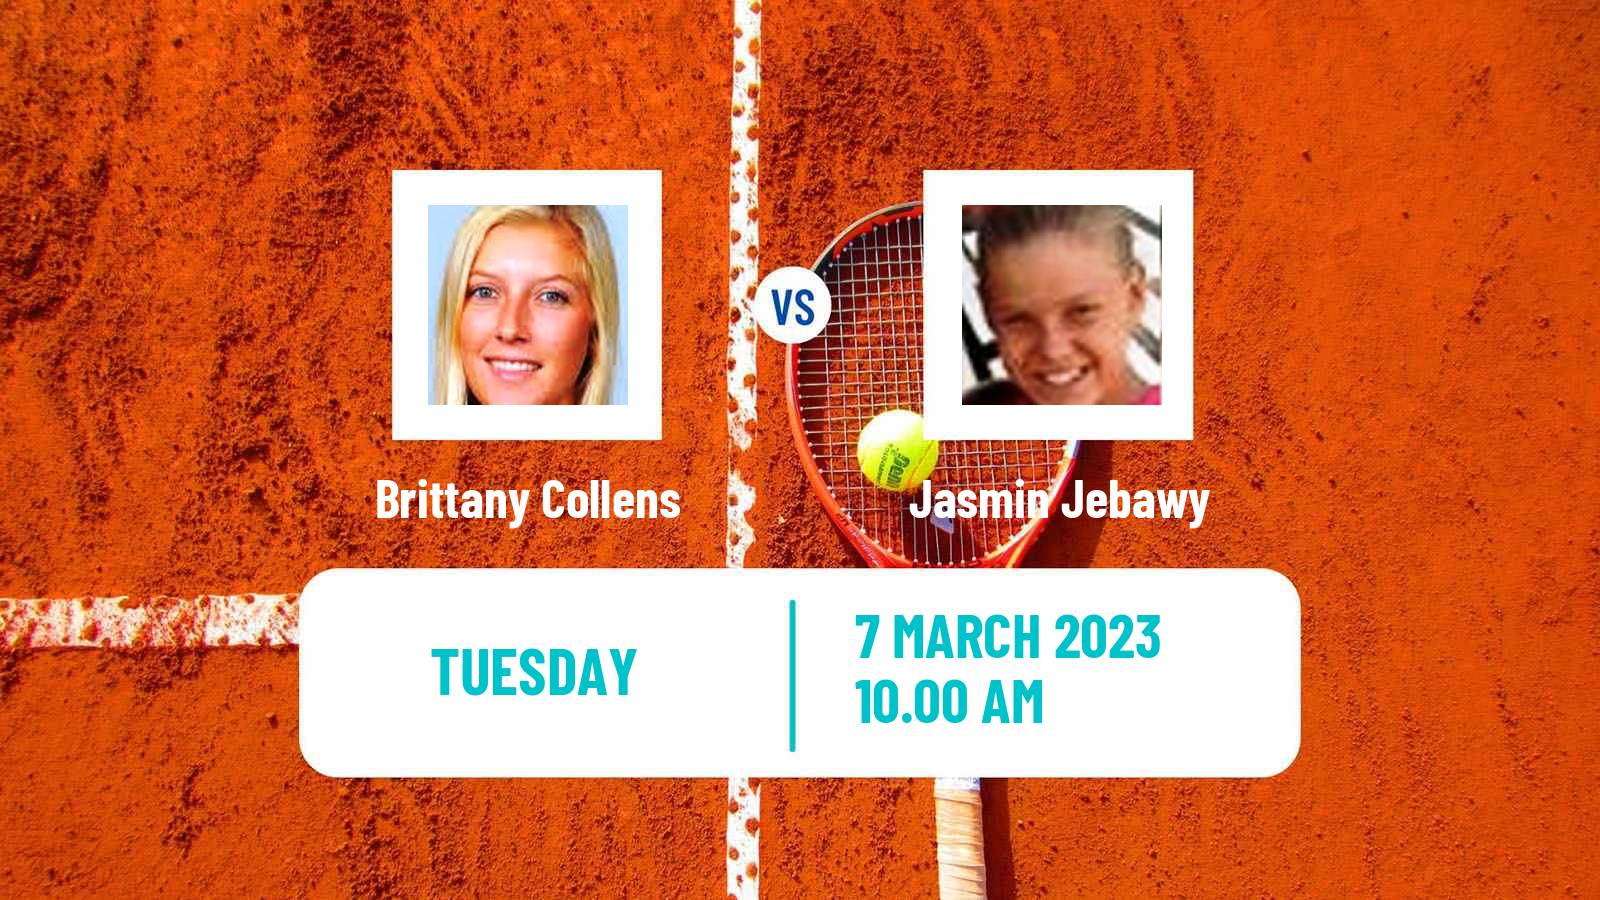 Tennis ITF Tournaments Brittany Collens - Jasmin Jebawy